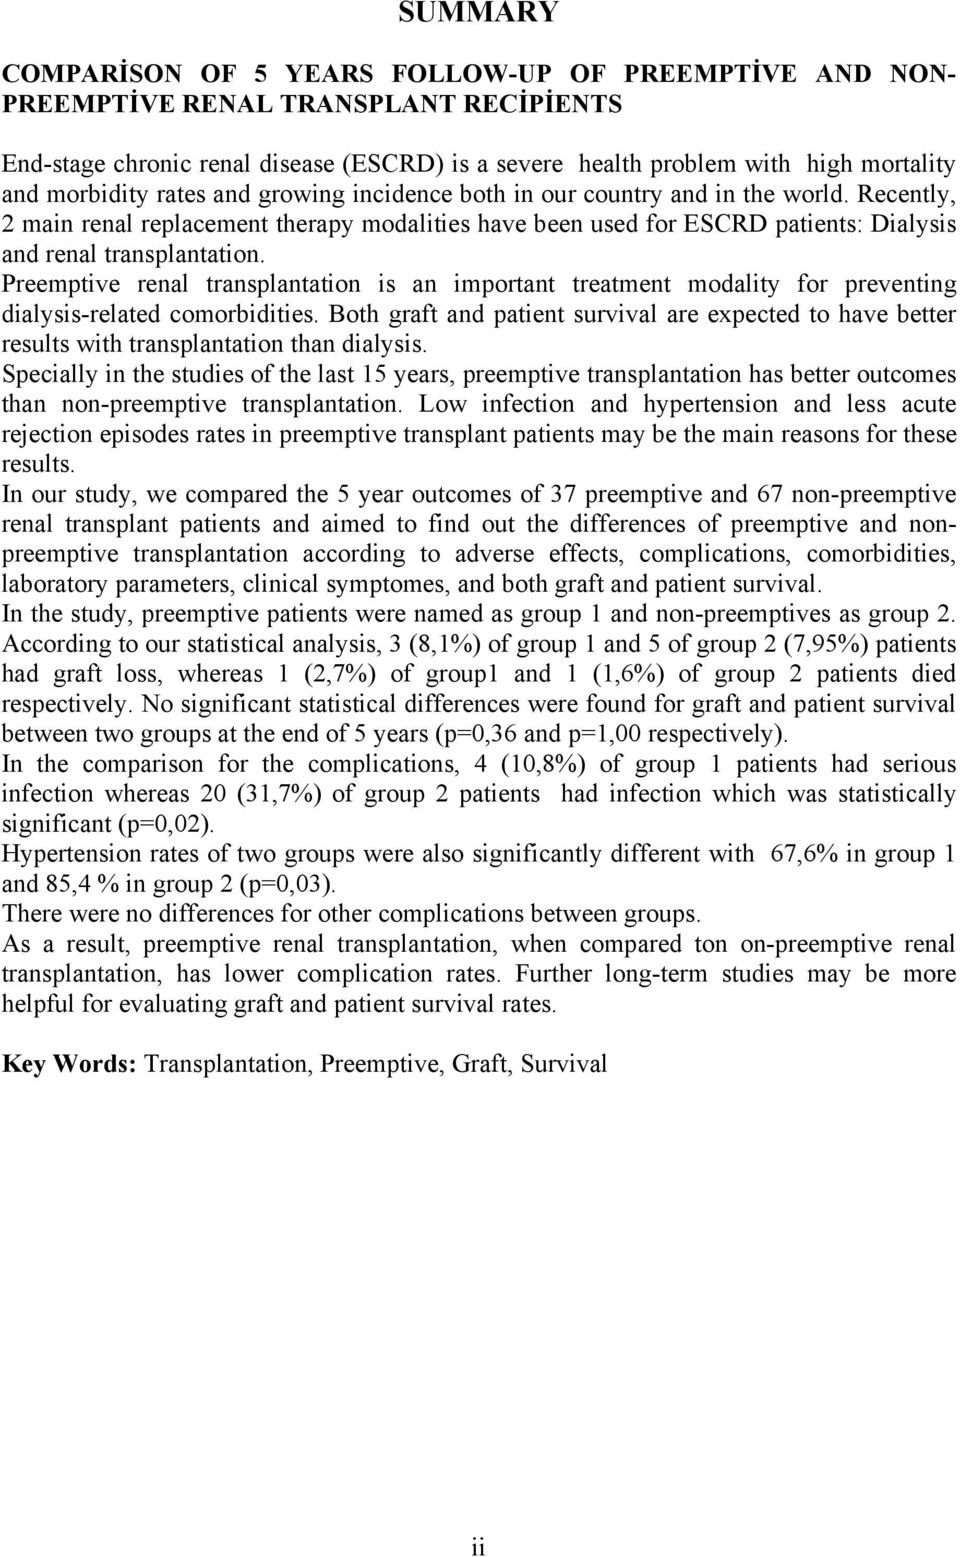 Preemptive renal transplantation is an important treatment modality for preventing dialysis-related comorbidities.